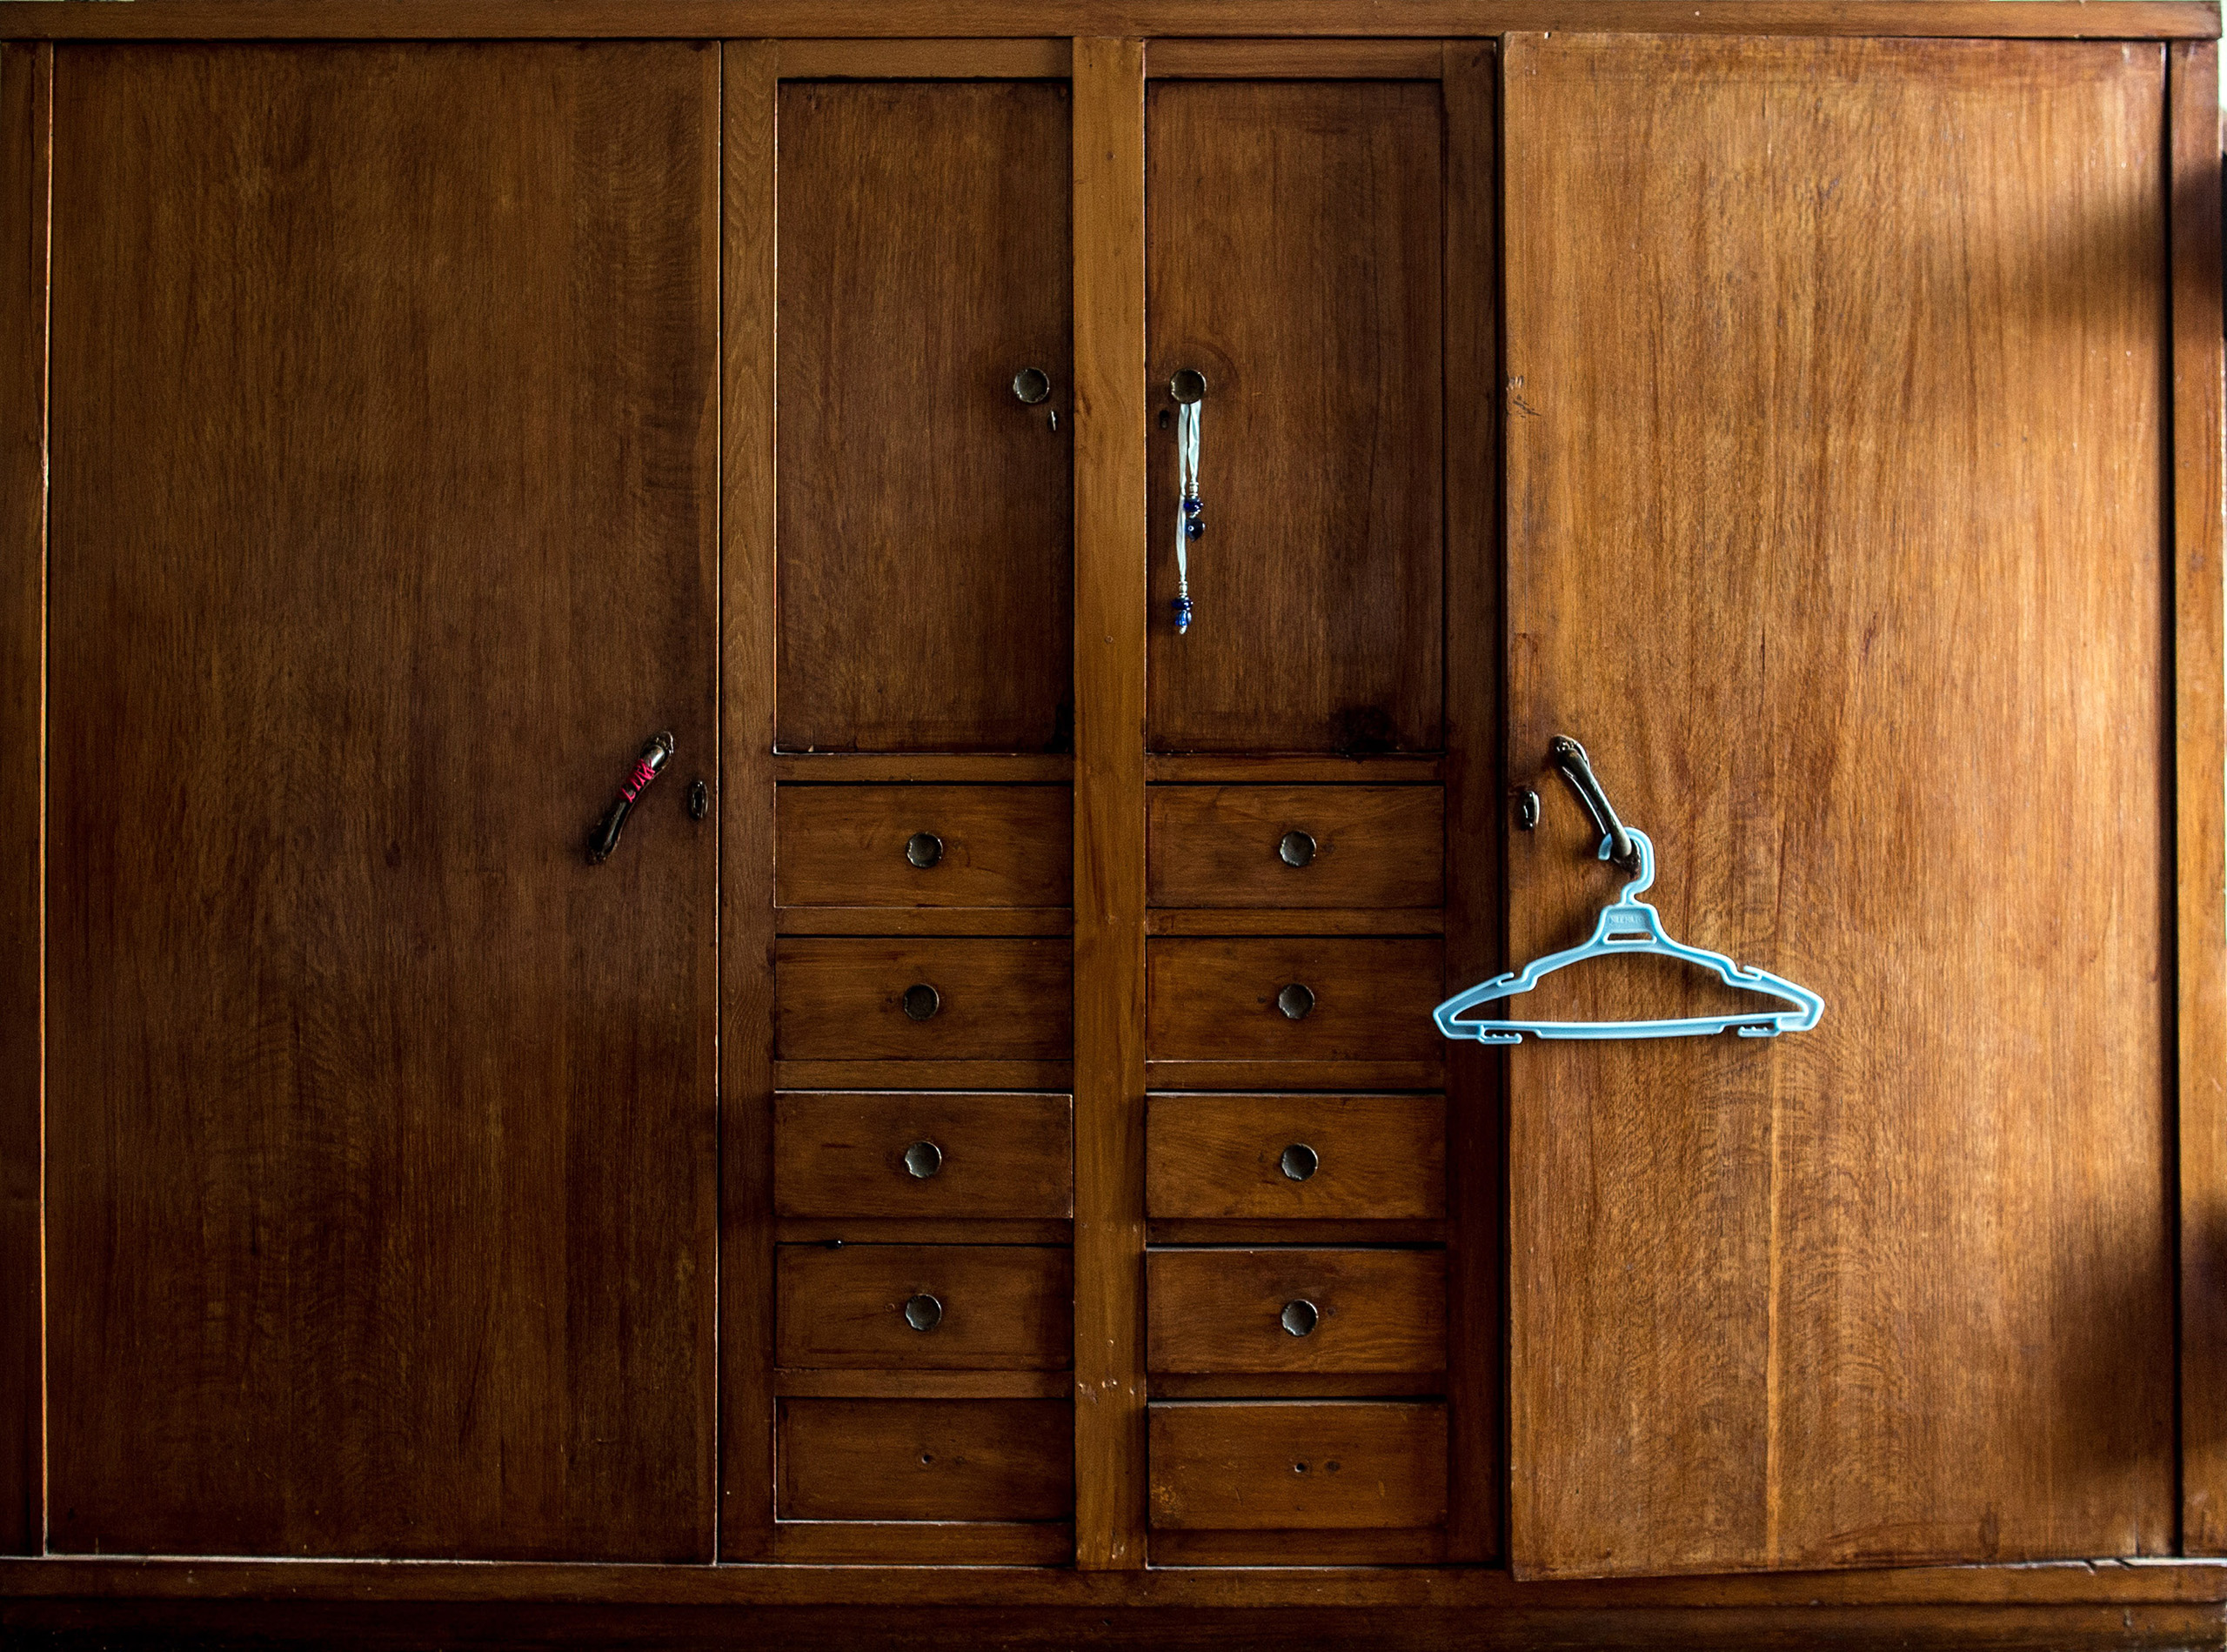 A woman's closet in Cairo, Egypt, 2015.